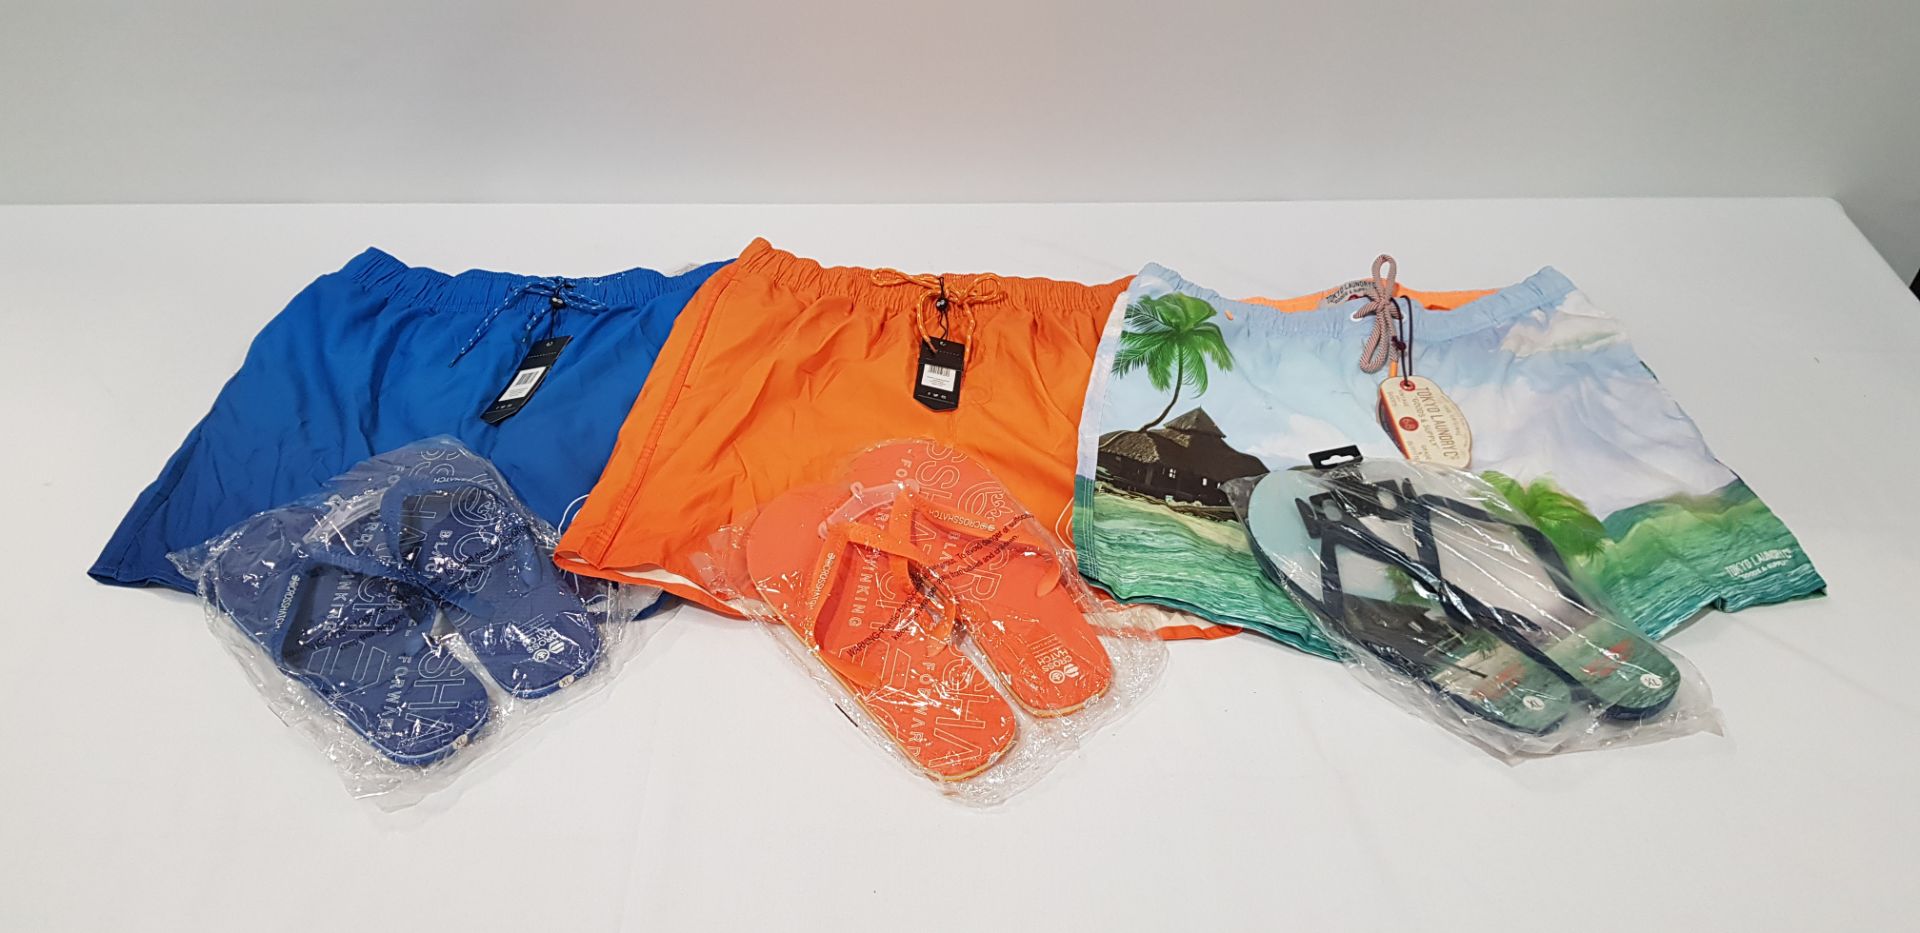 12 X BRAND NEW MIXED LOT CONTAINING 7 MIXED SWIMMING SHORTS IN MIXED SIZES AND STYLES, 5 MIXED